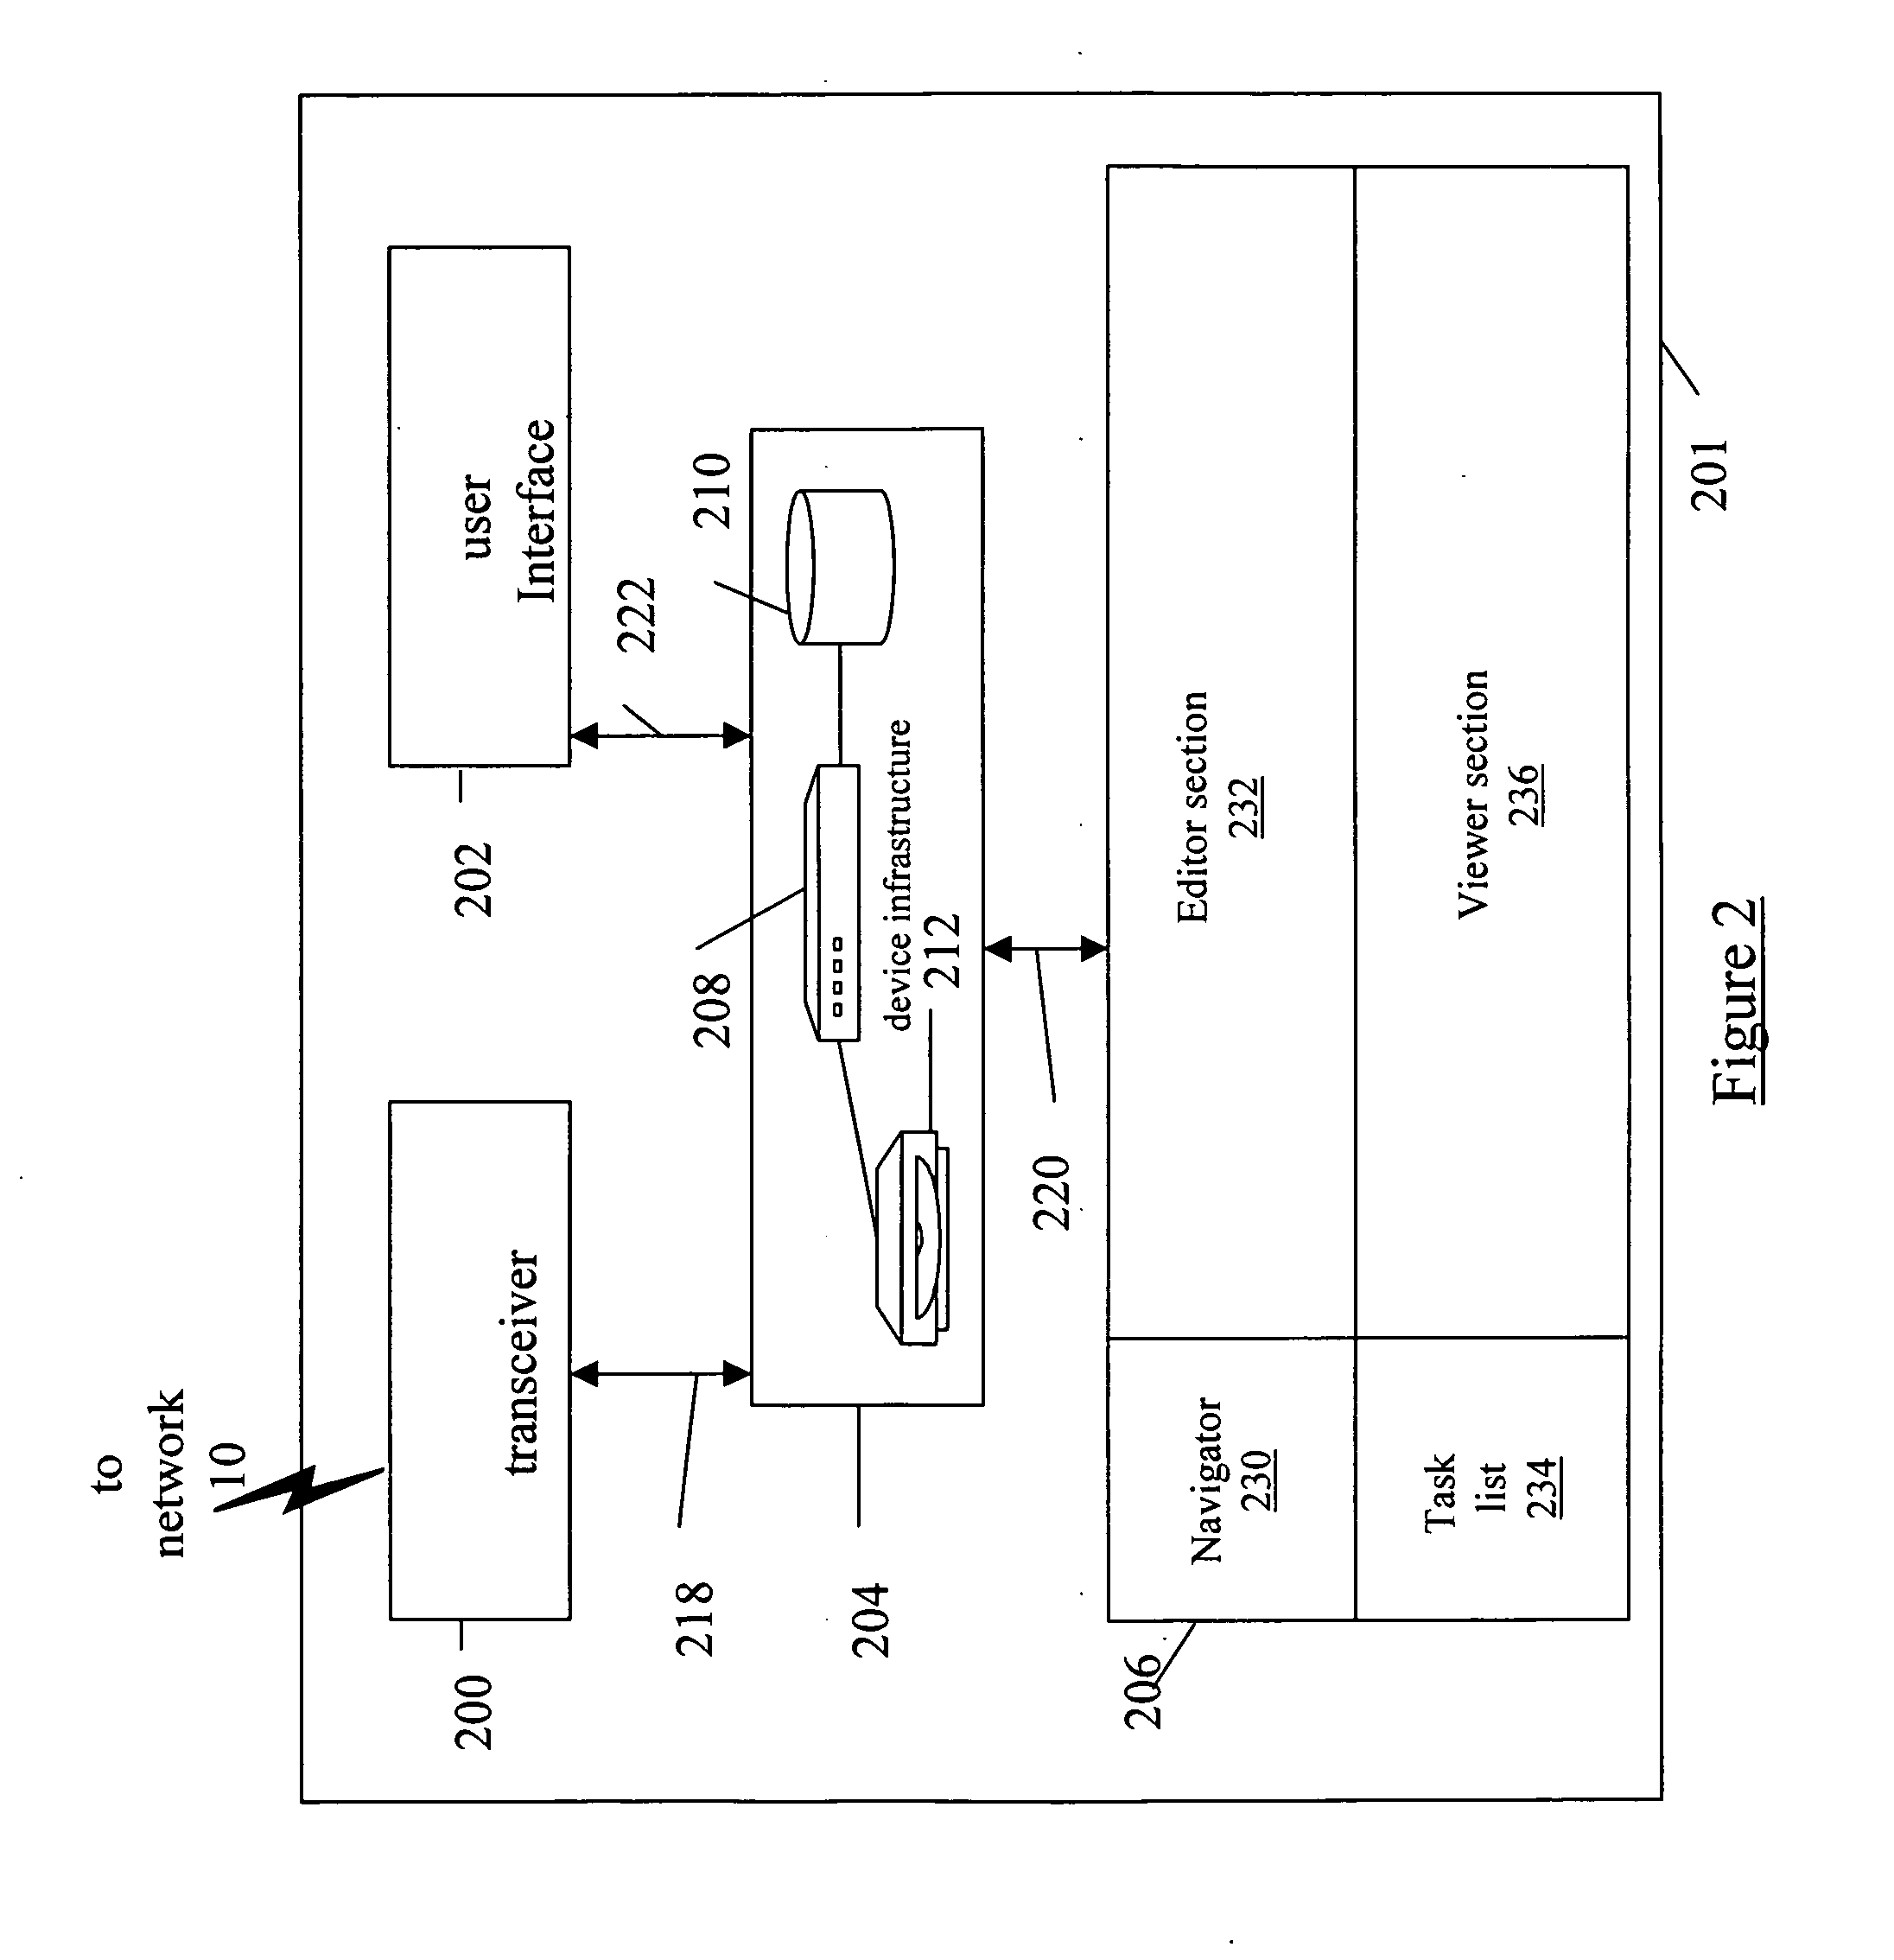 System and method of data source detection